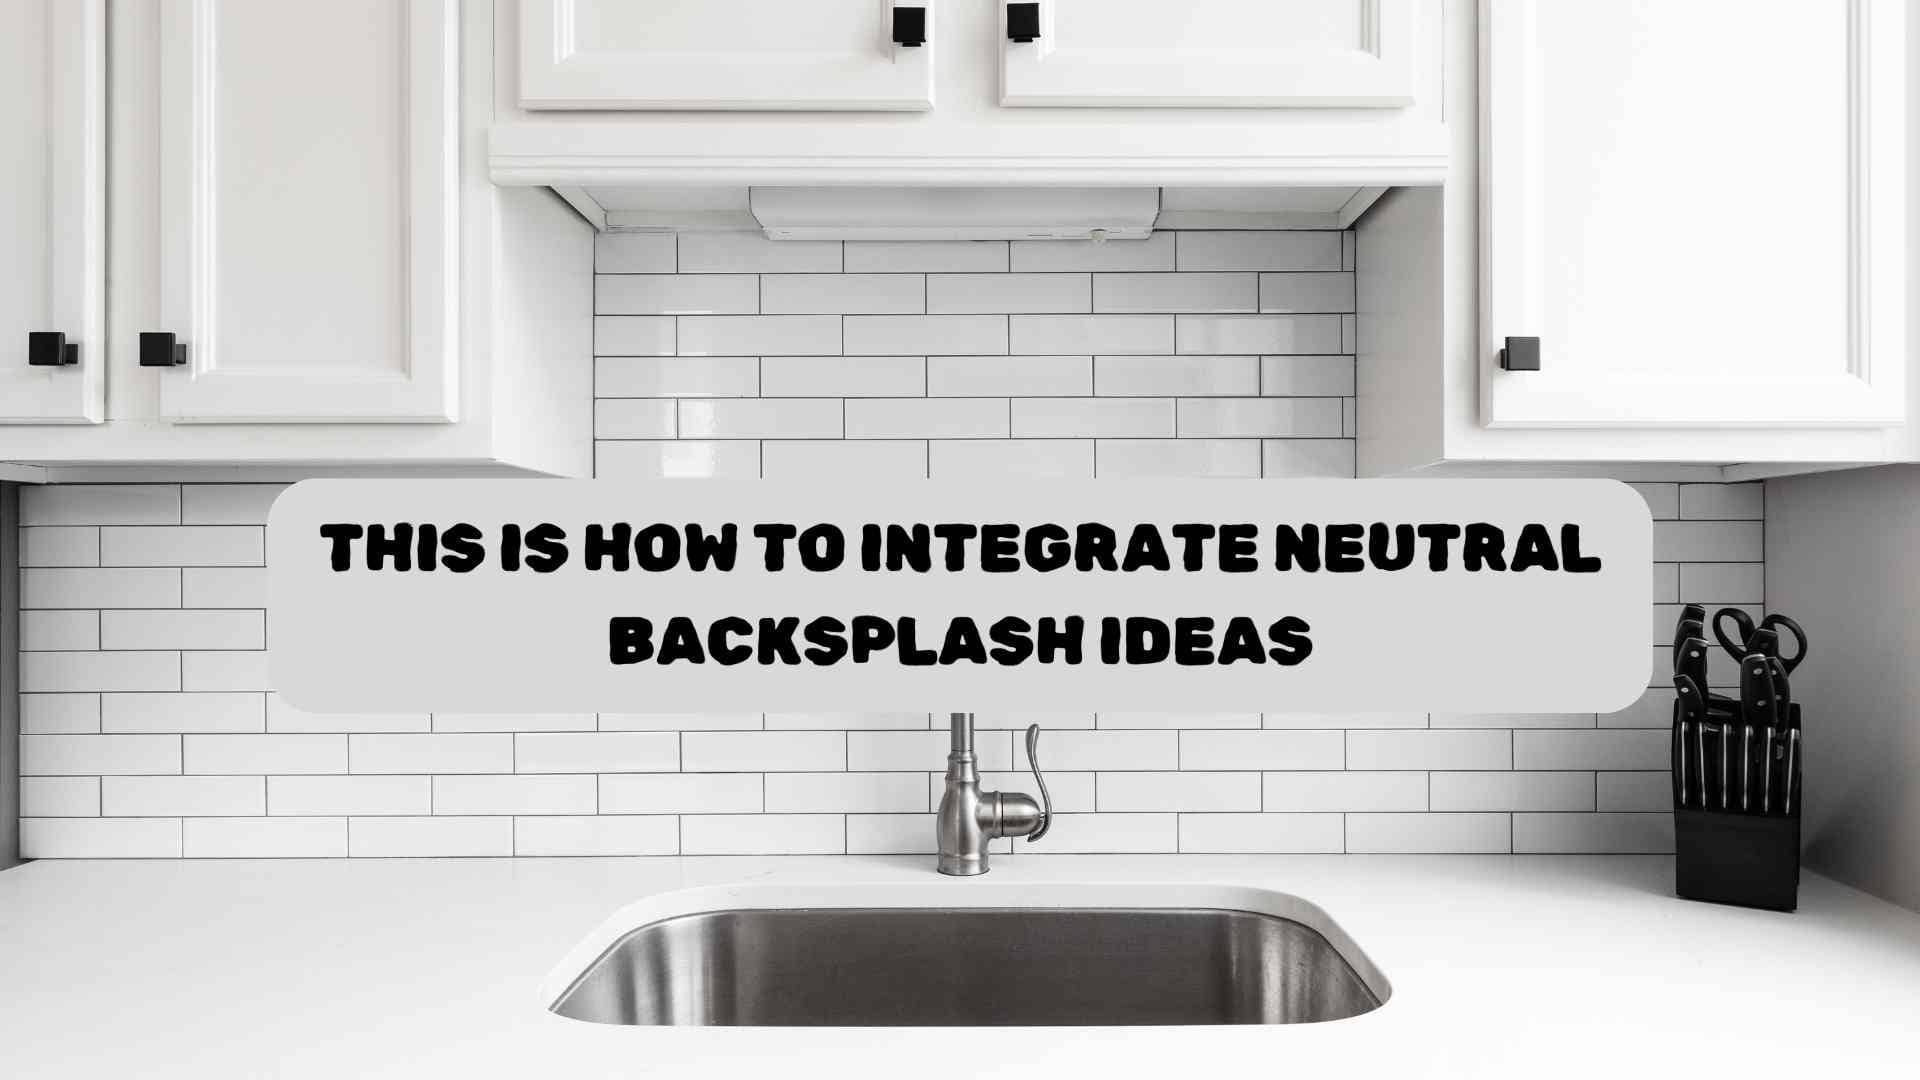 This is how to intergrate backsplash ideas in your kitchen